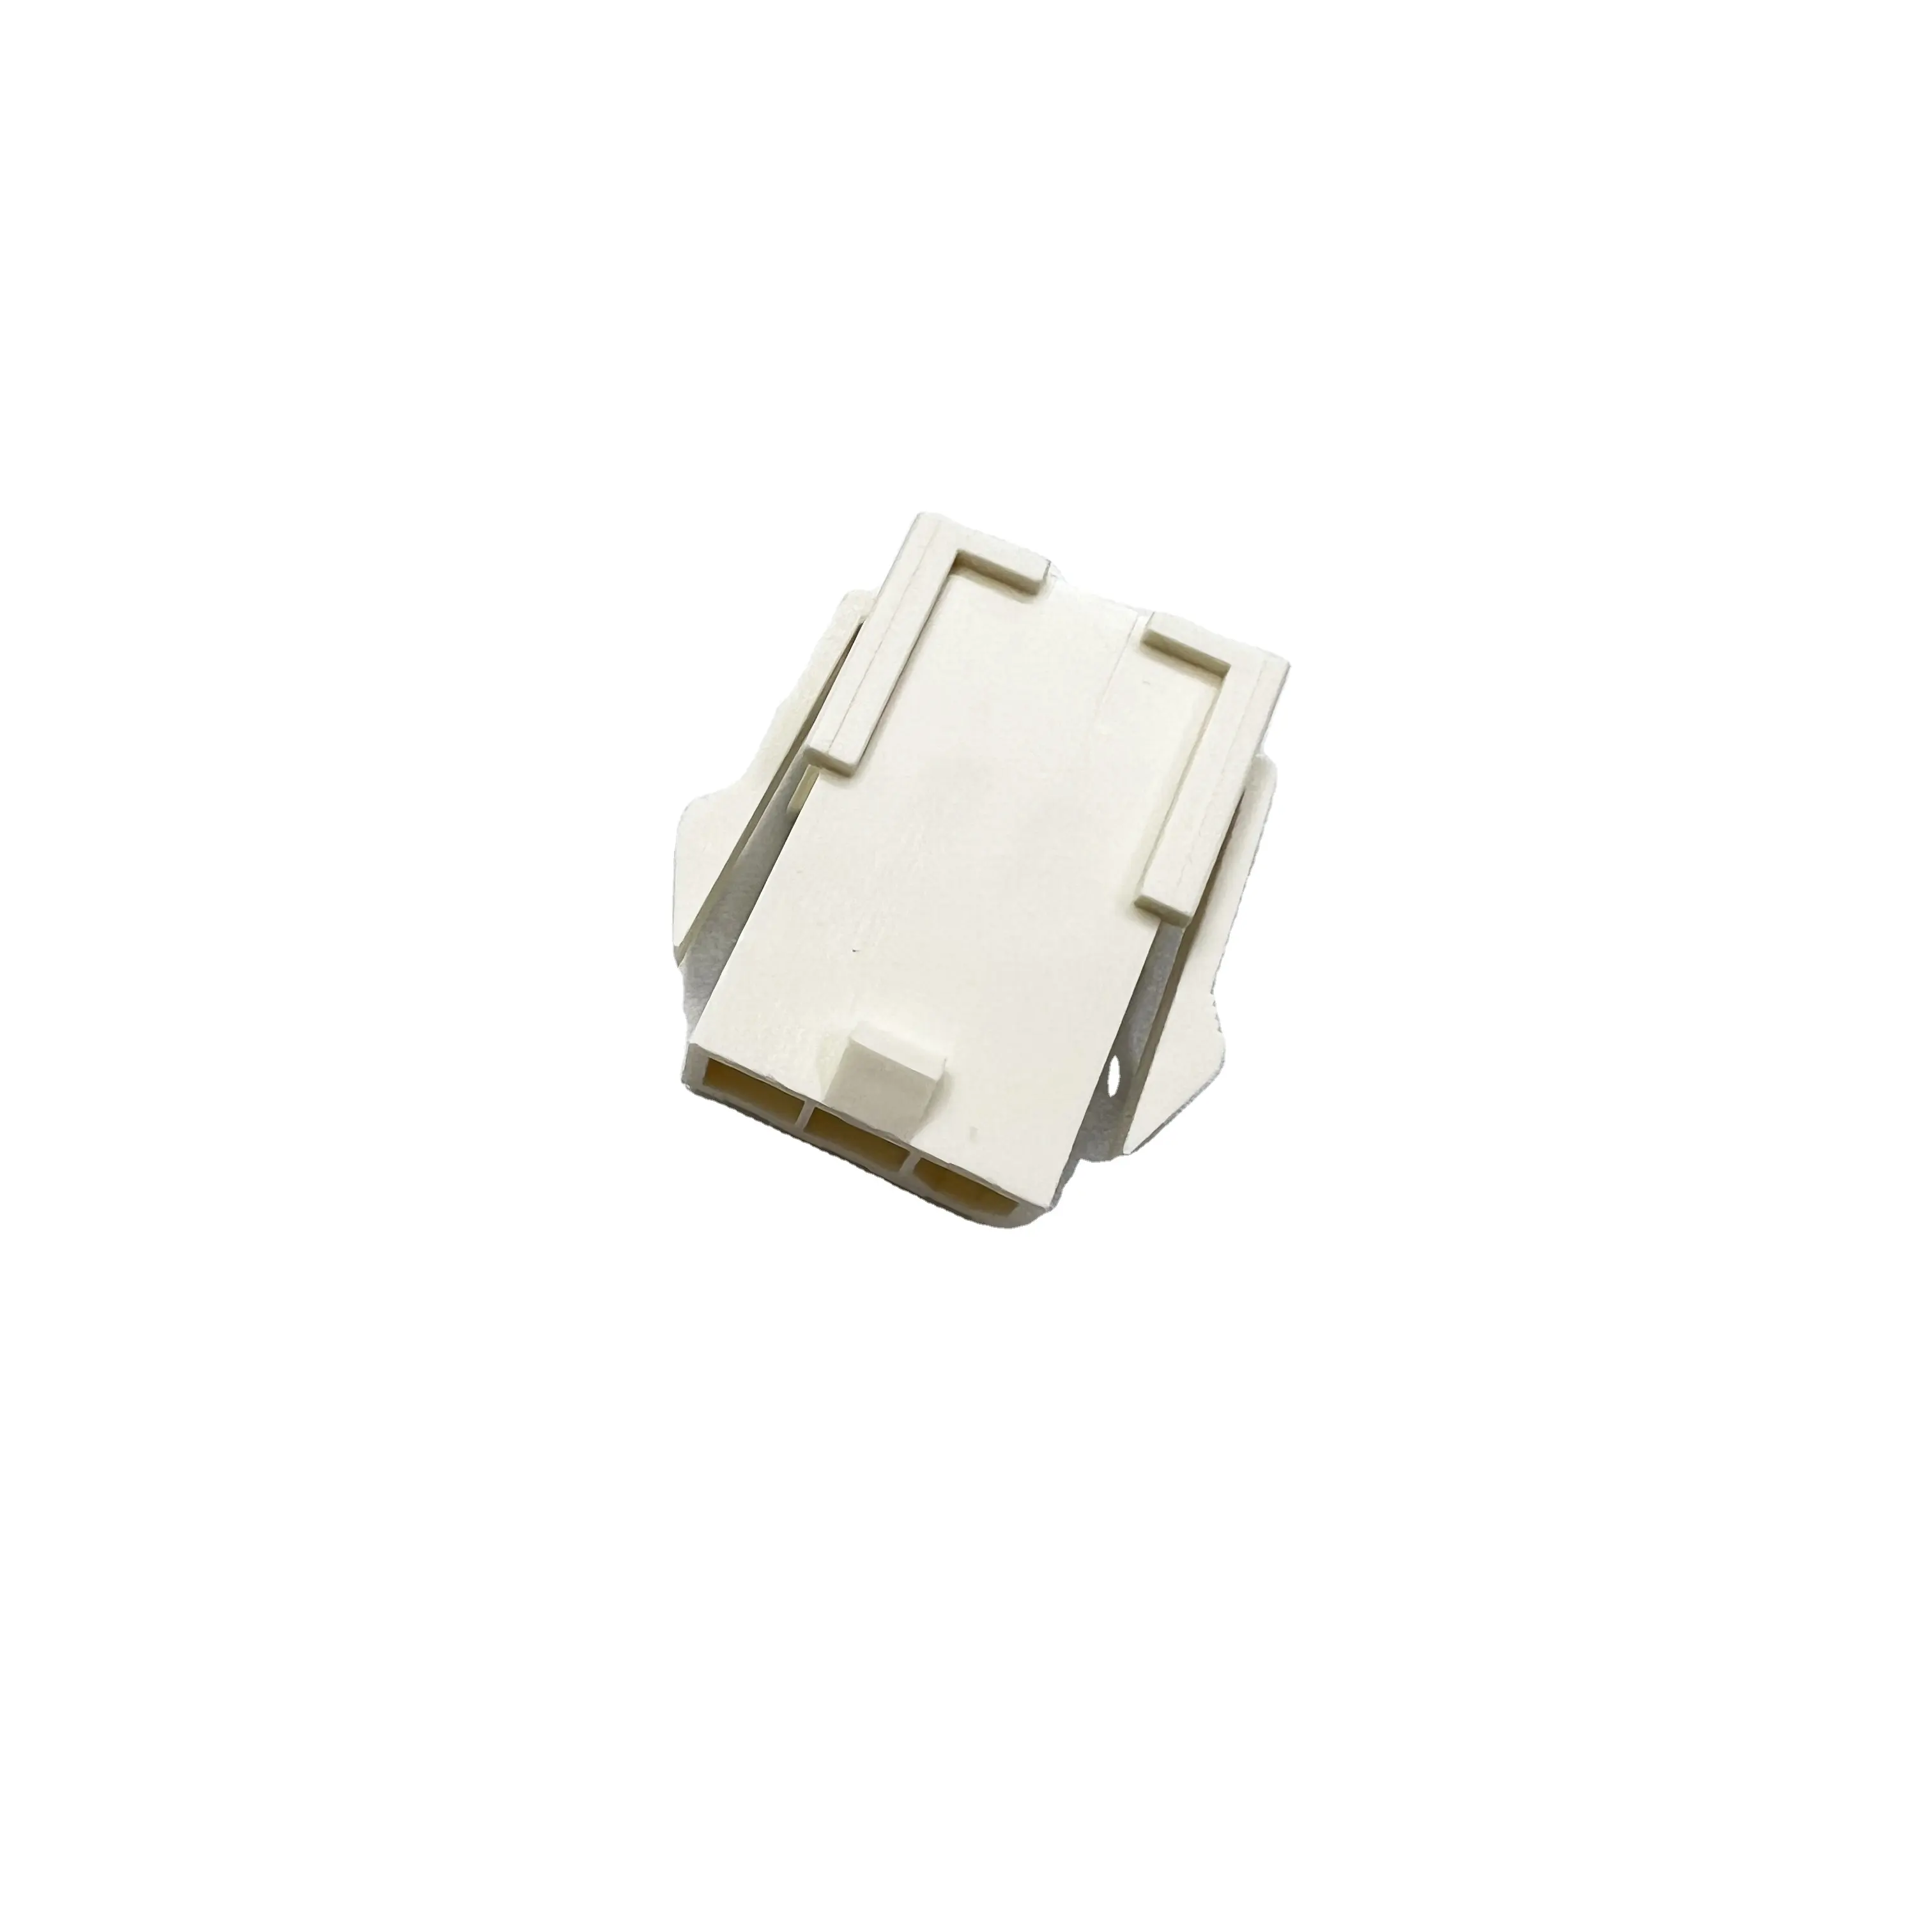 Glow wire 5559-03P 4.2mm Connector 5557 5559 5569 5566 3 pin female housing with Panel Mounting Ears 5559-03P2 39014032